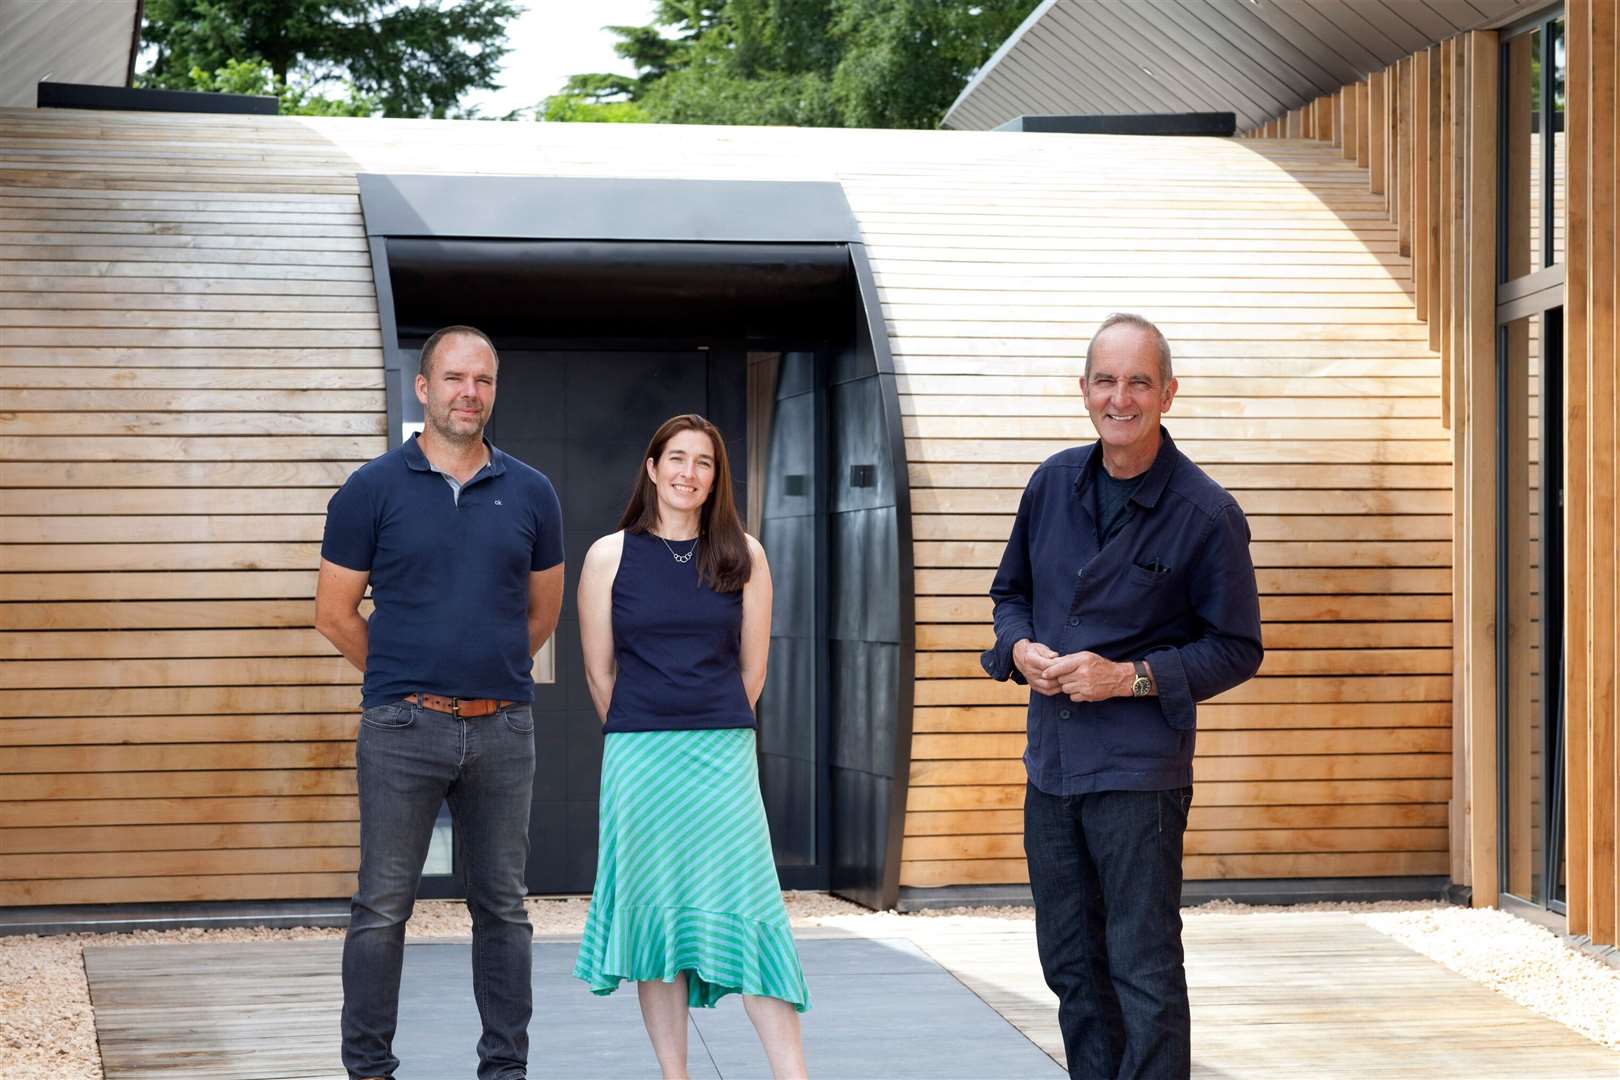 Canterbury home built on a hill features in Channel 4's Grand Designs. Picture: Channel 4